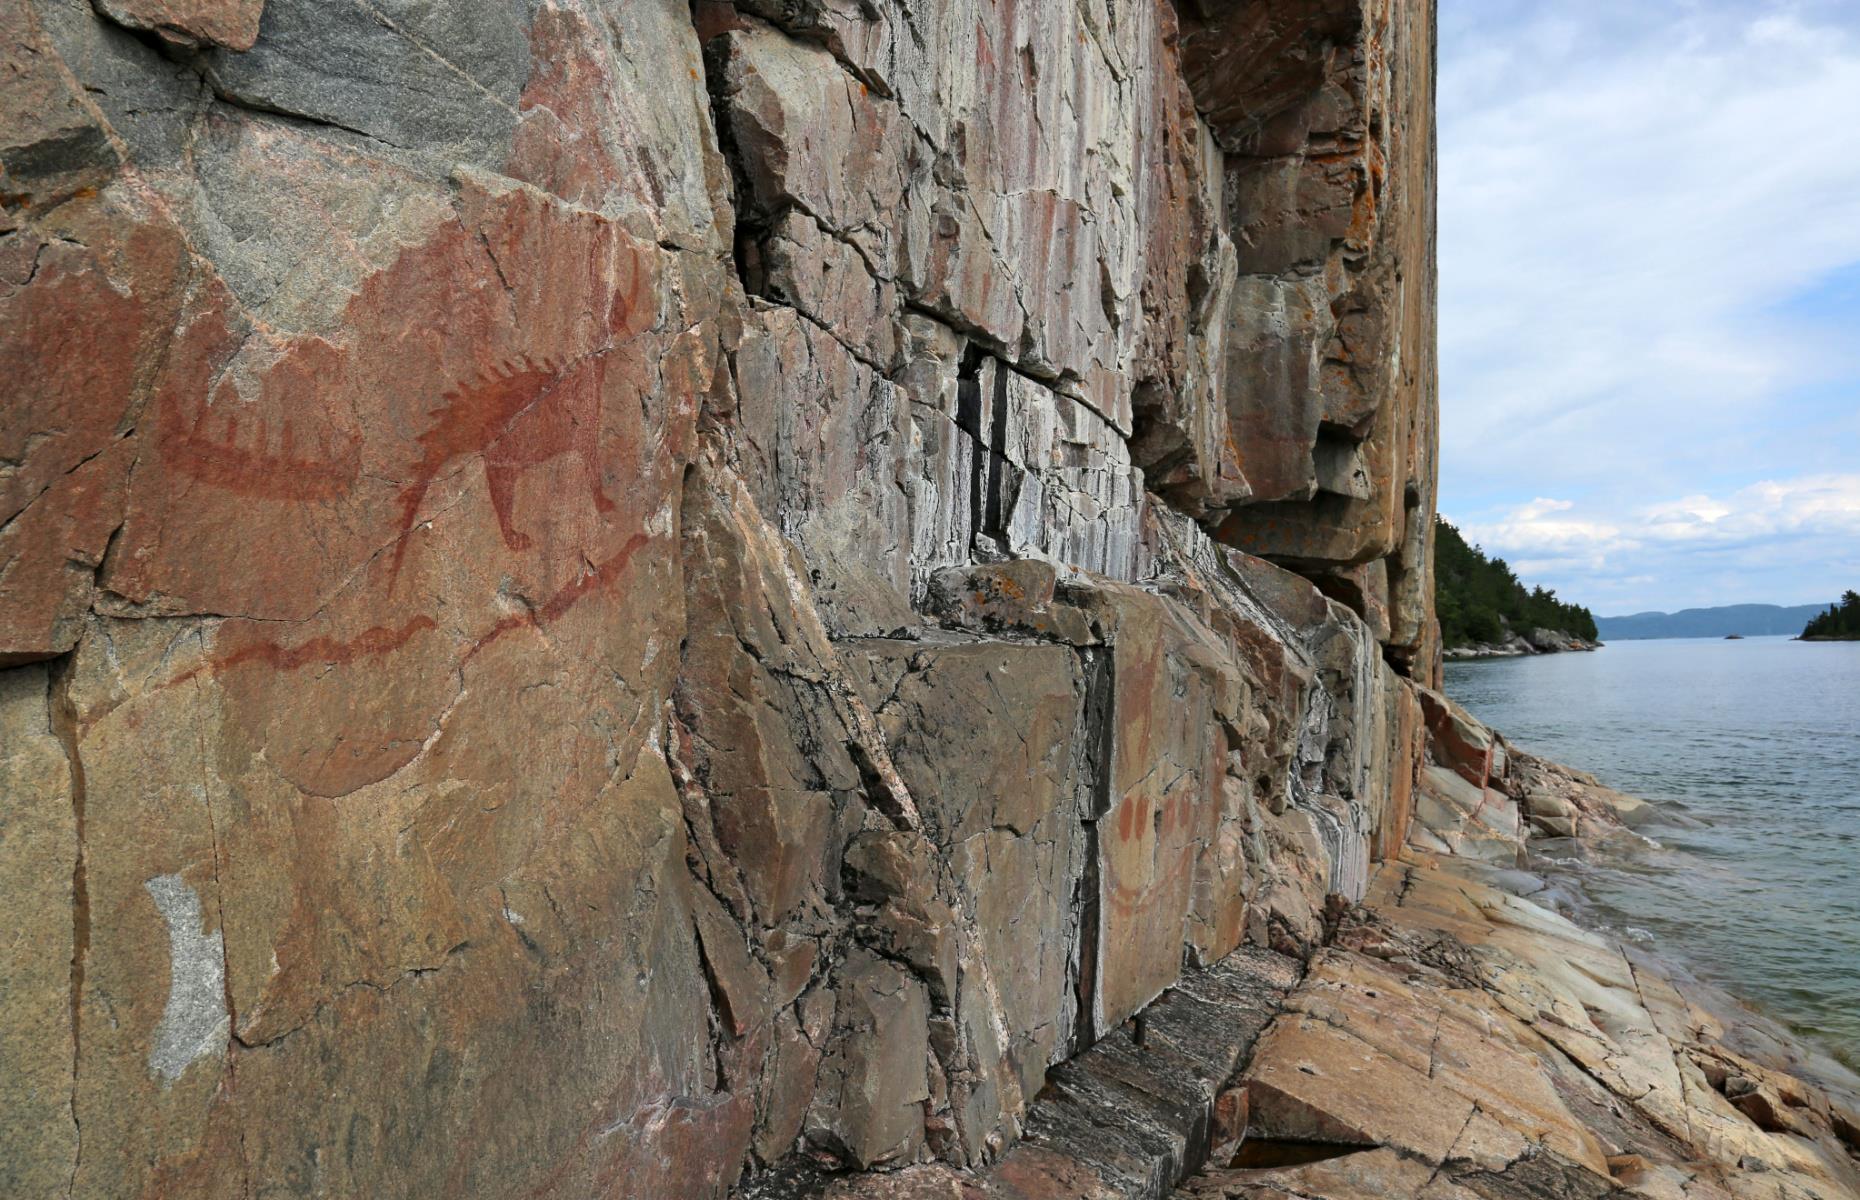 <p>Indigenous peoples lived throughout Canada long before settlers landed, so the country is filled with sacred sites of varying cultural importance. The <a href="https://www.ontarioparks.com/park/lakesuperior">Agawa Rock</a> pictographs can be found in Lake Superior Provincial Park – these are red-ochre rock paintings created by Ojibwe artists several centuries ago. The paintings are a little bit out of the way – tourists can access the park near Sault Ste Marie and then take a short hike to the site.</p>